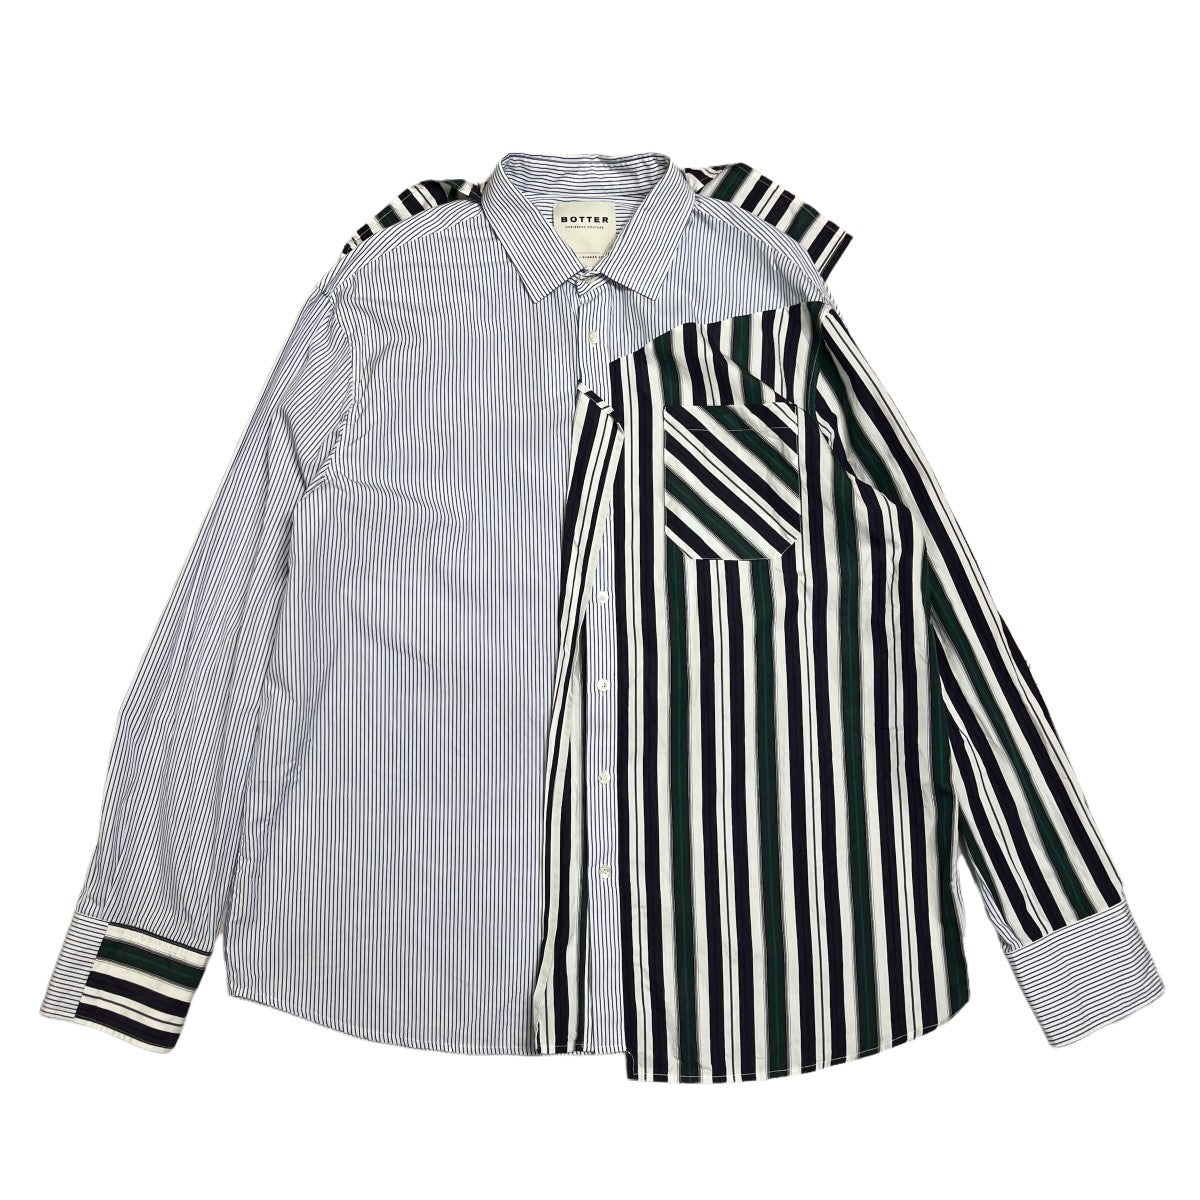 BOTTER(ボッター) LONG SLEEVE SHIRT WITH ATTACHED SCARF IN NECK ...